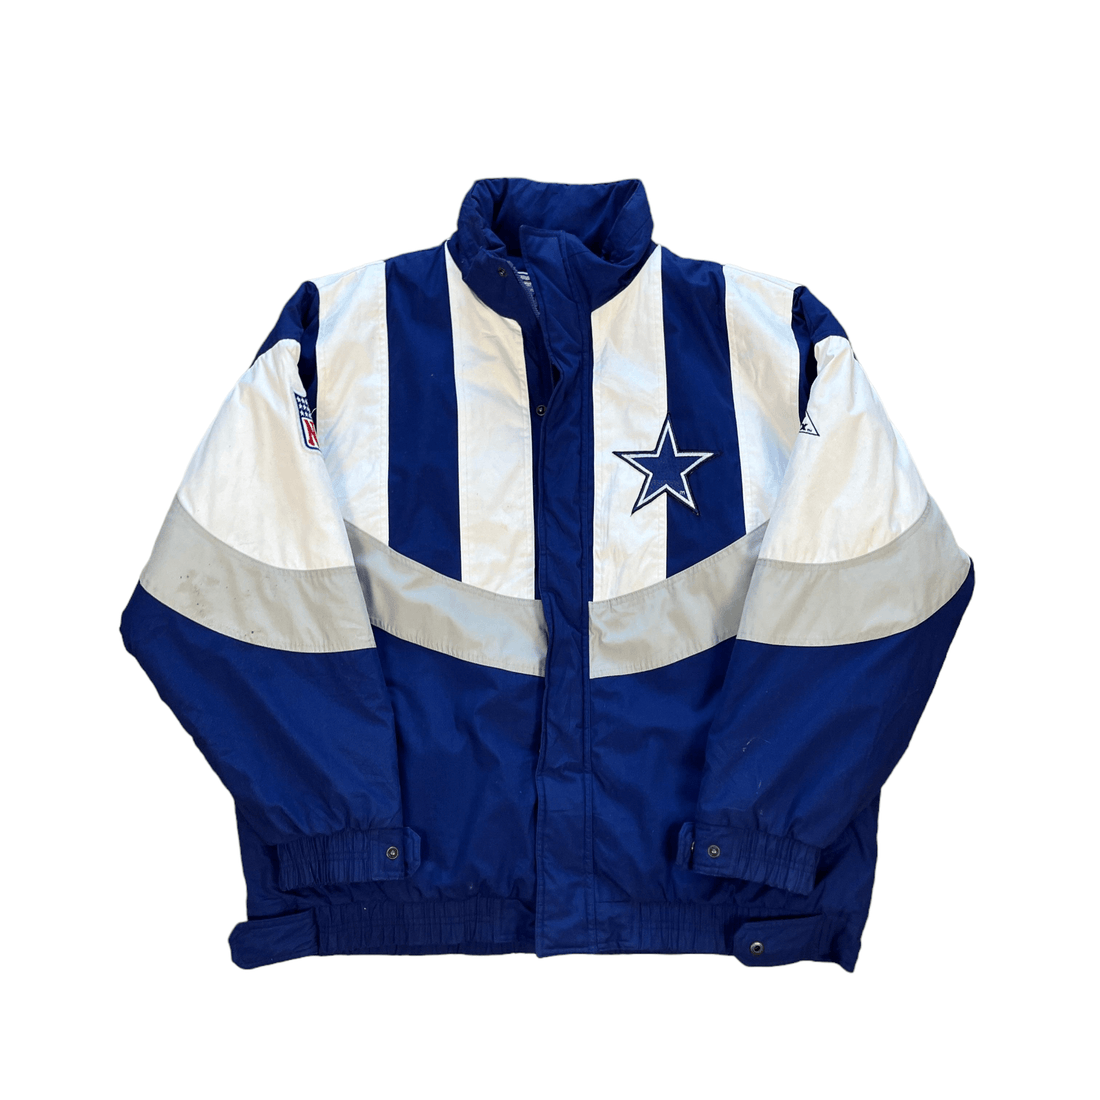 Vintage Navy Blue, White + Grey NFL Dallas Cowboys Puffer Coat - Extra Large - The Streetwear Studio